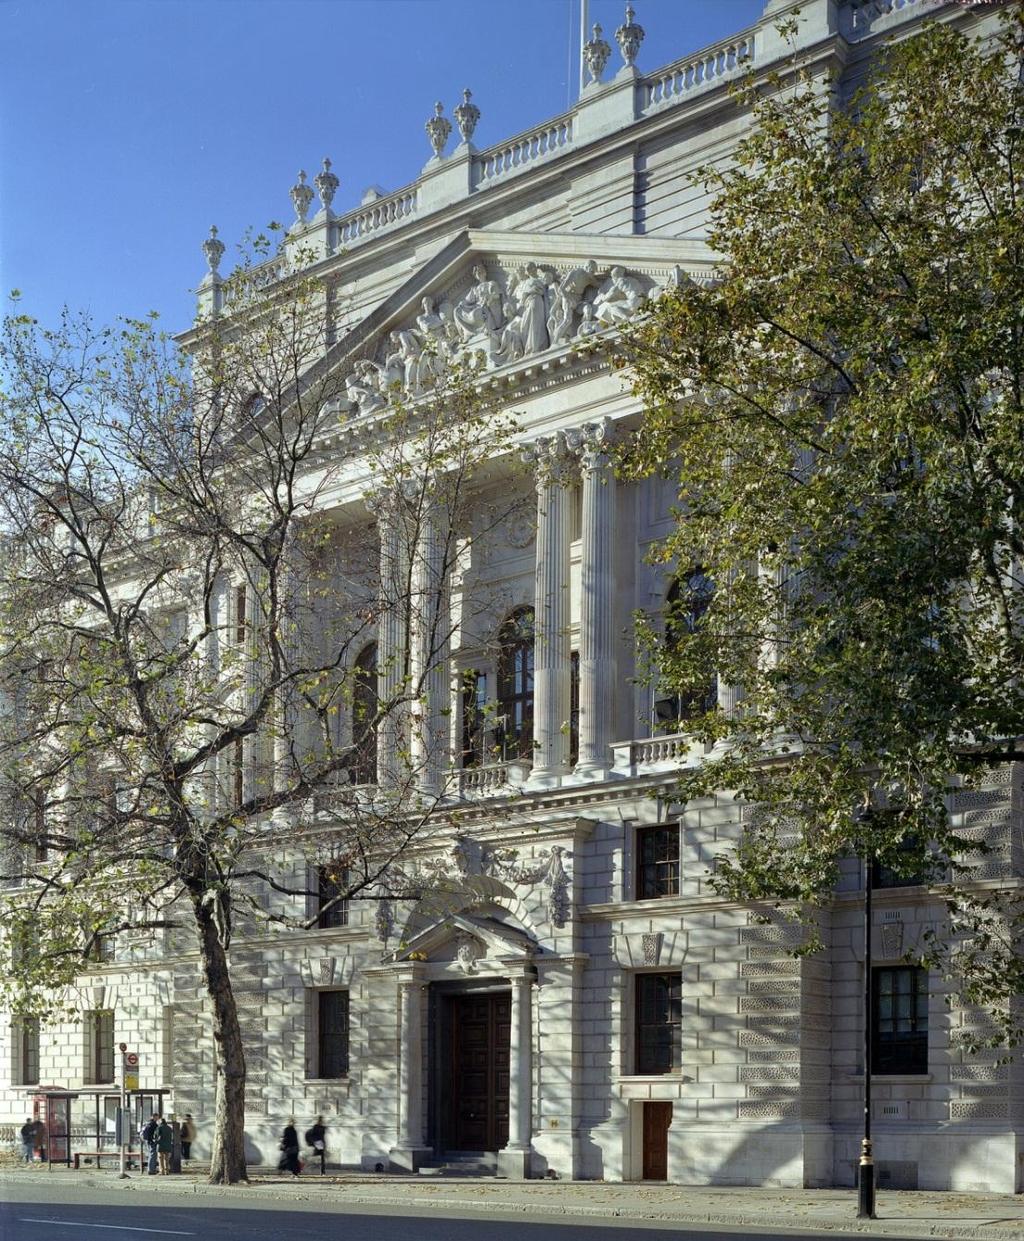 1. Introduction The HM Treasury Building is a grade II* listed building that was refurbished under two separate concession agreements between 2000 and 2004.